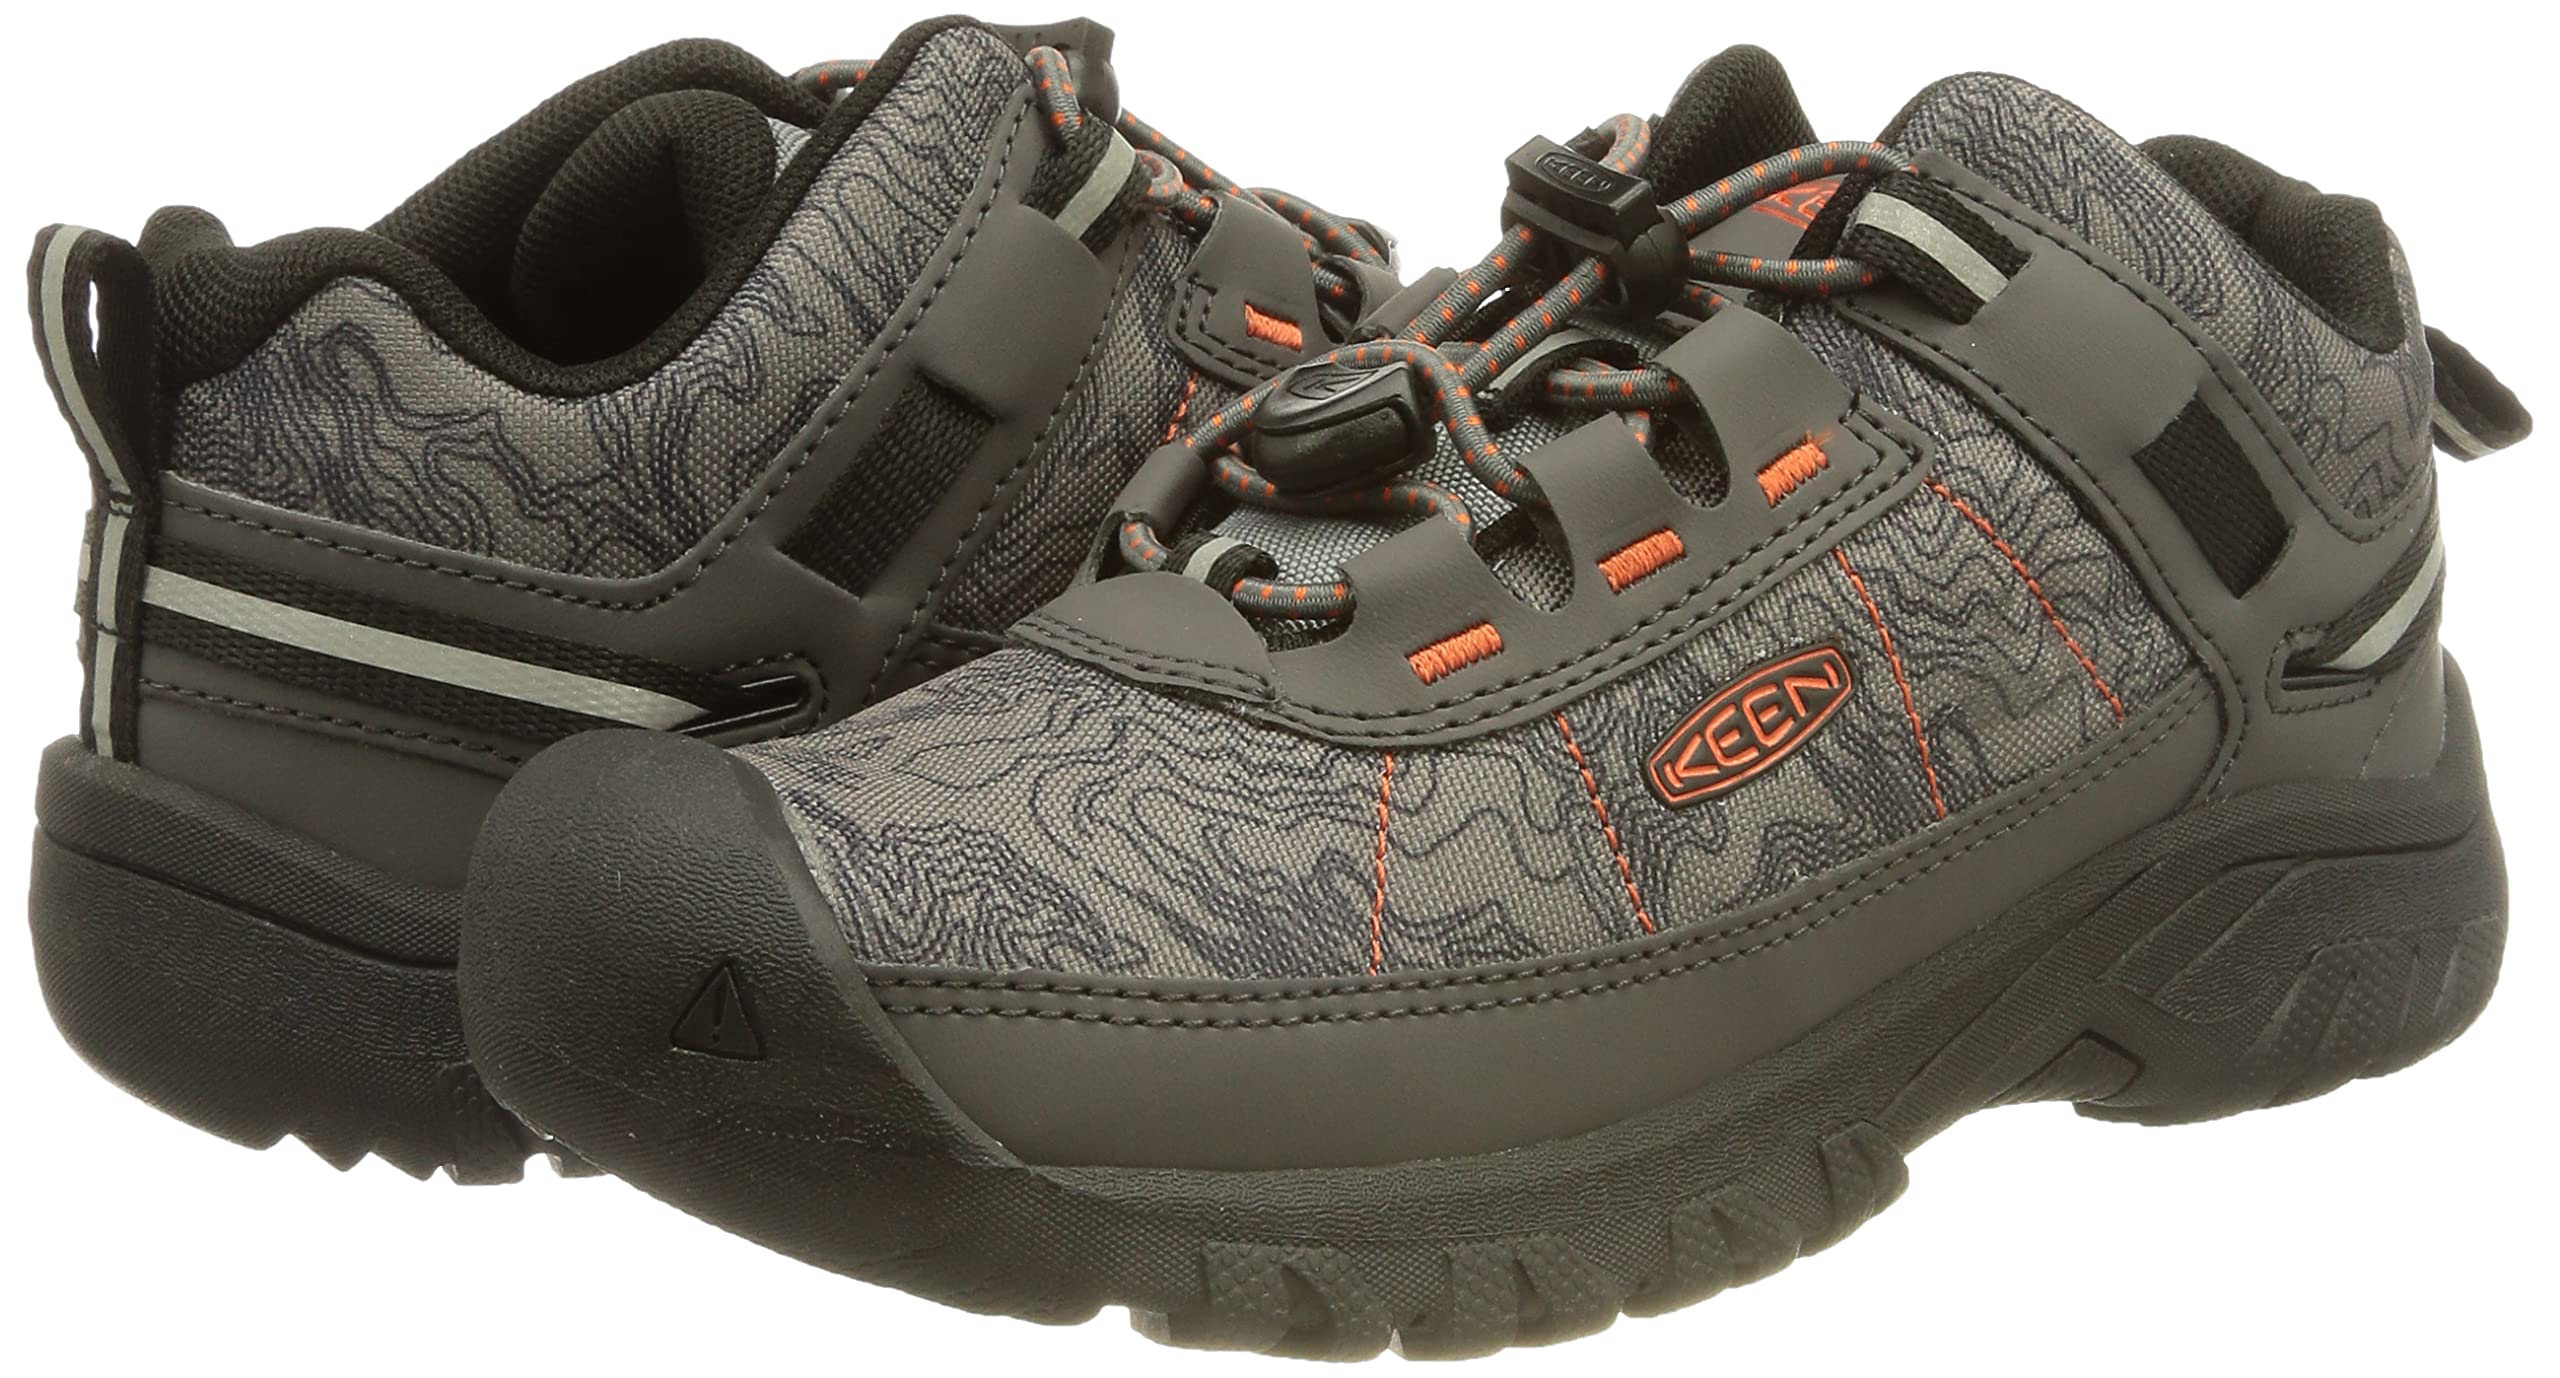 KEEN Unisex-Child Targhee Sport Breathable Easy on Lightweight Hiking Shoes